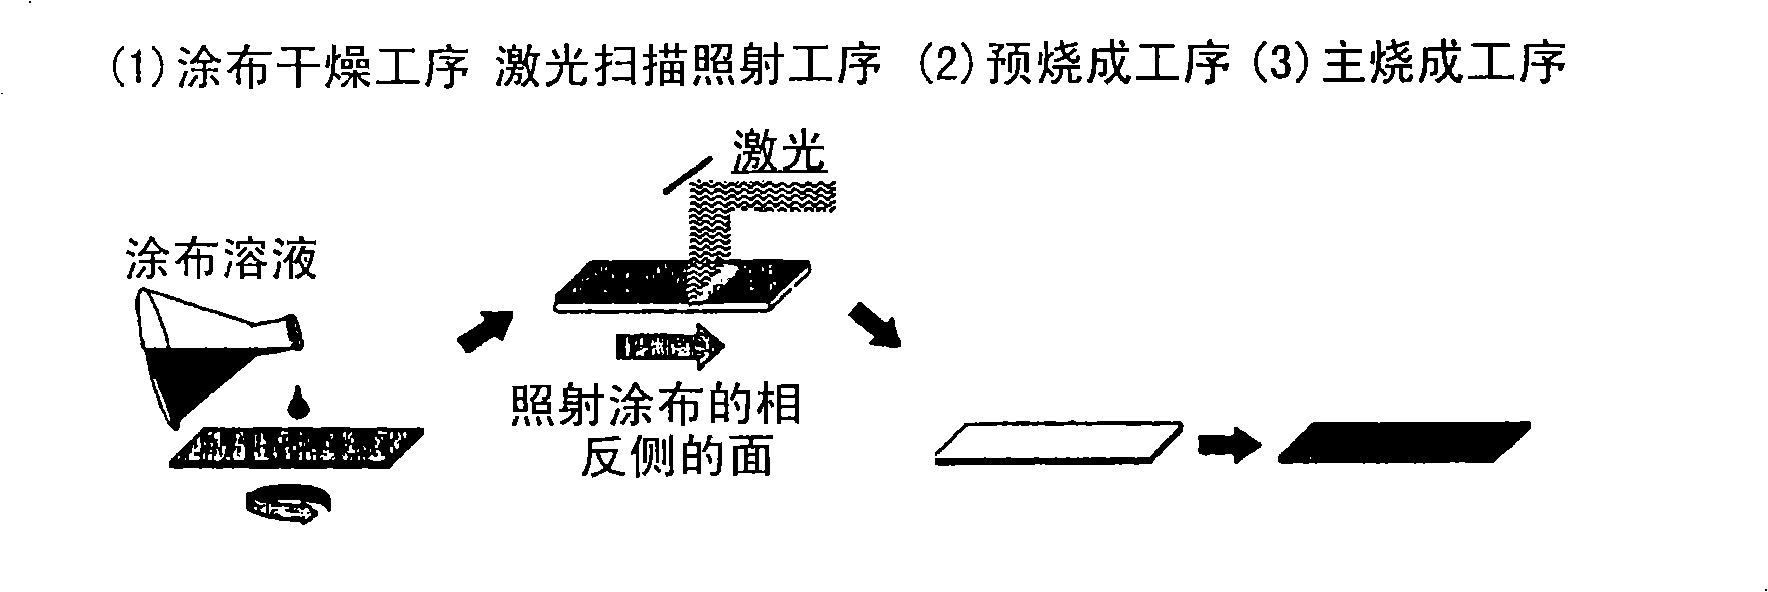 Process for producing superconducting oxide material